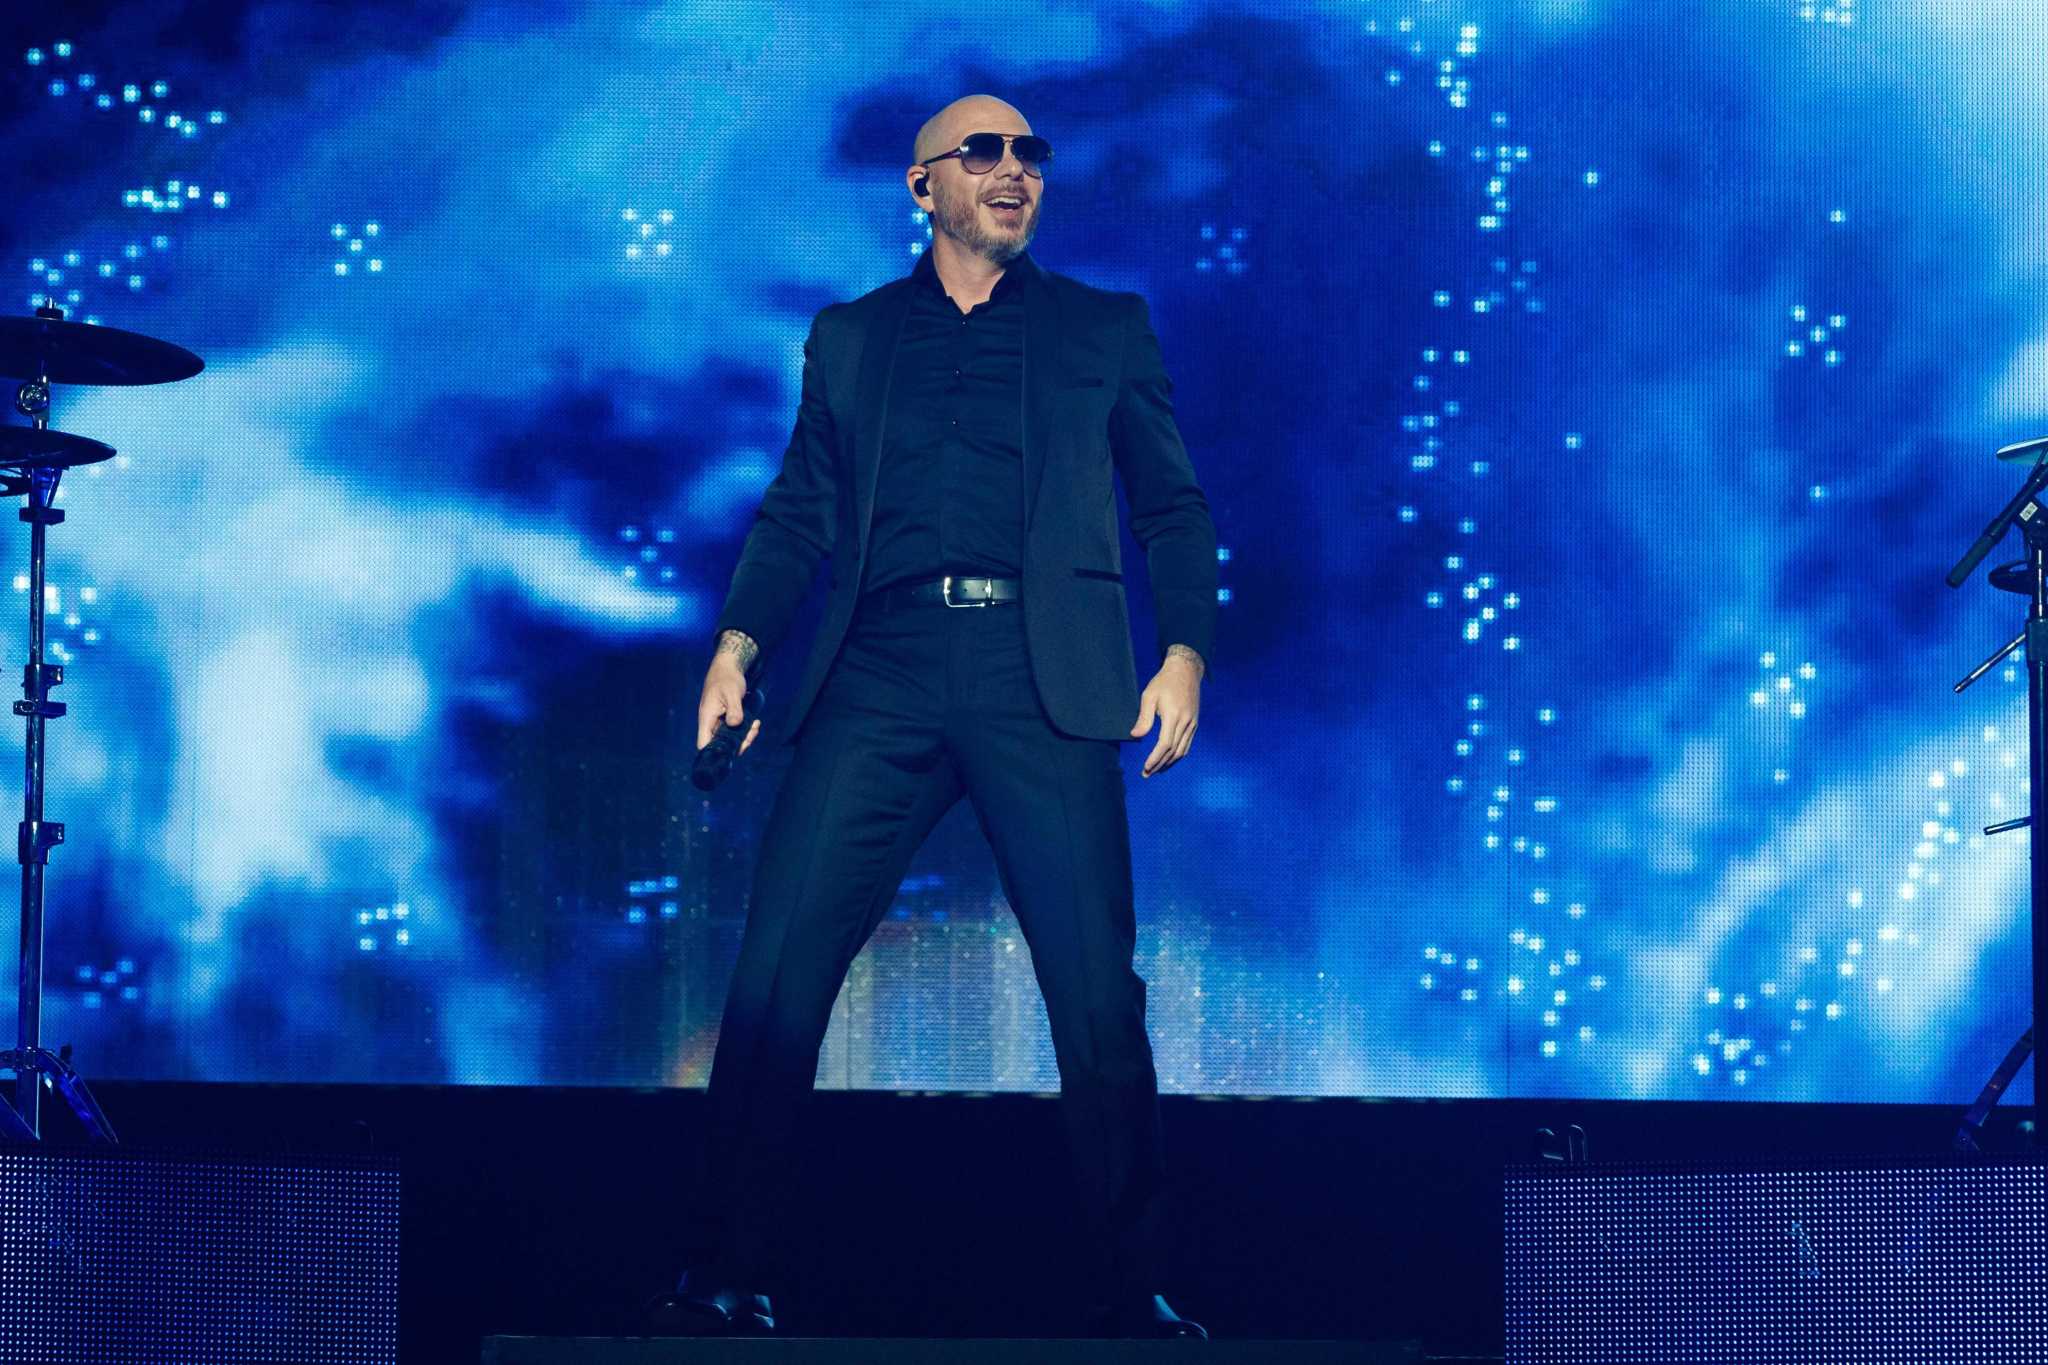 Pitbull's concert at Foxwoods has been postponed